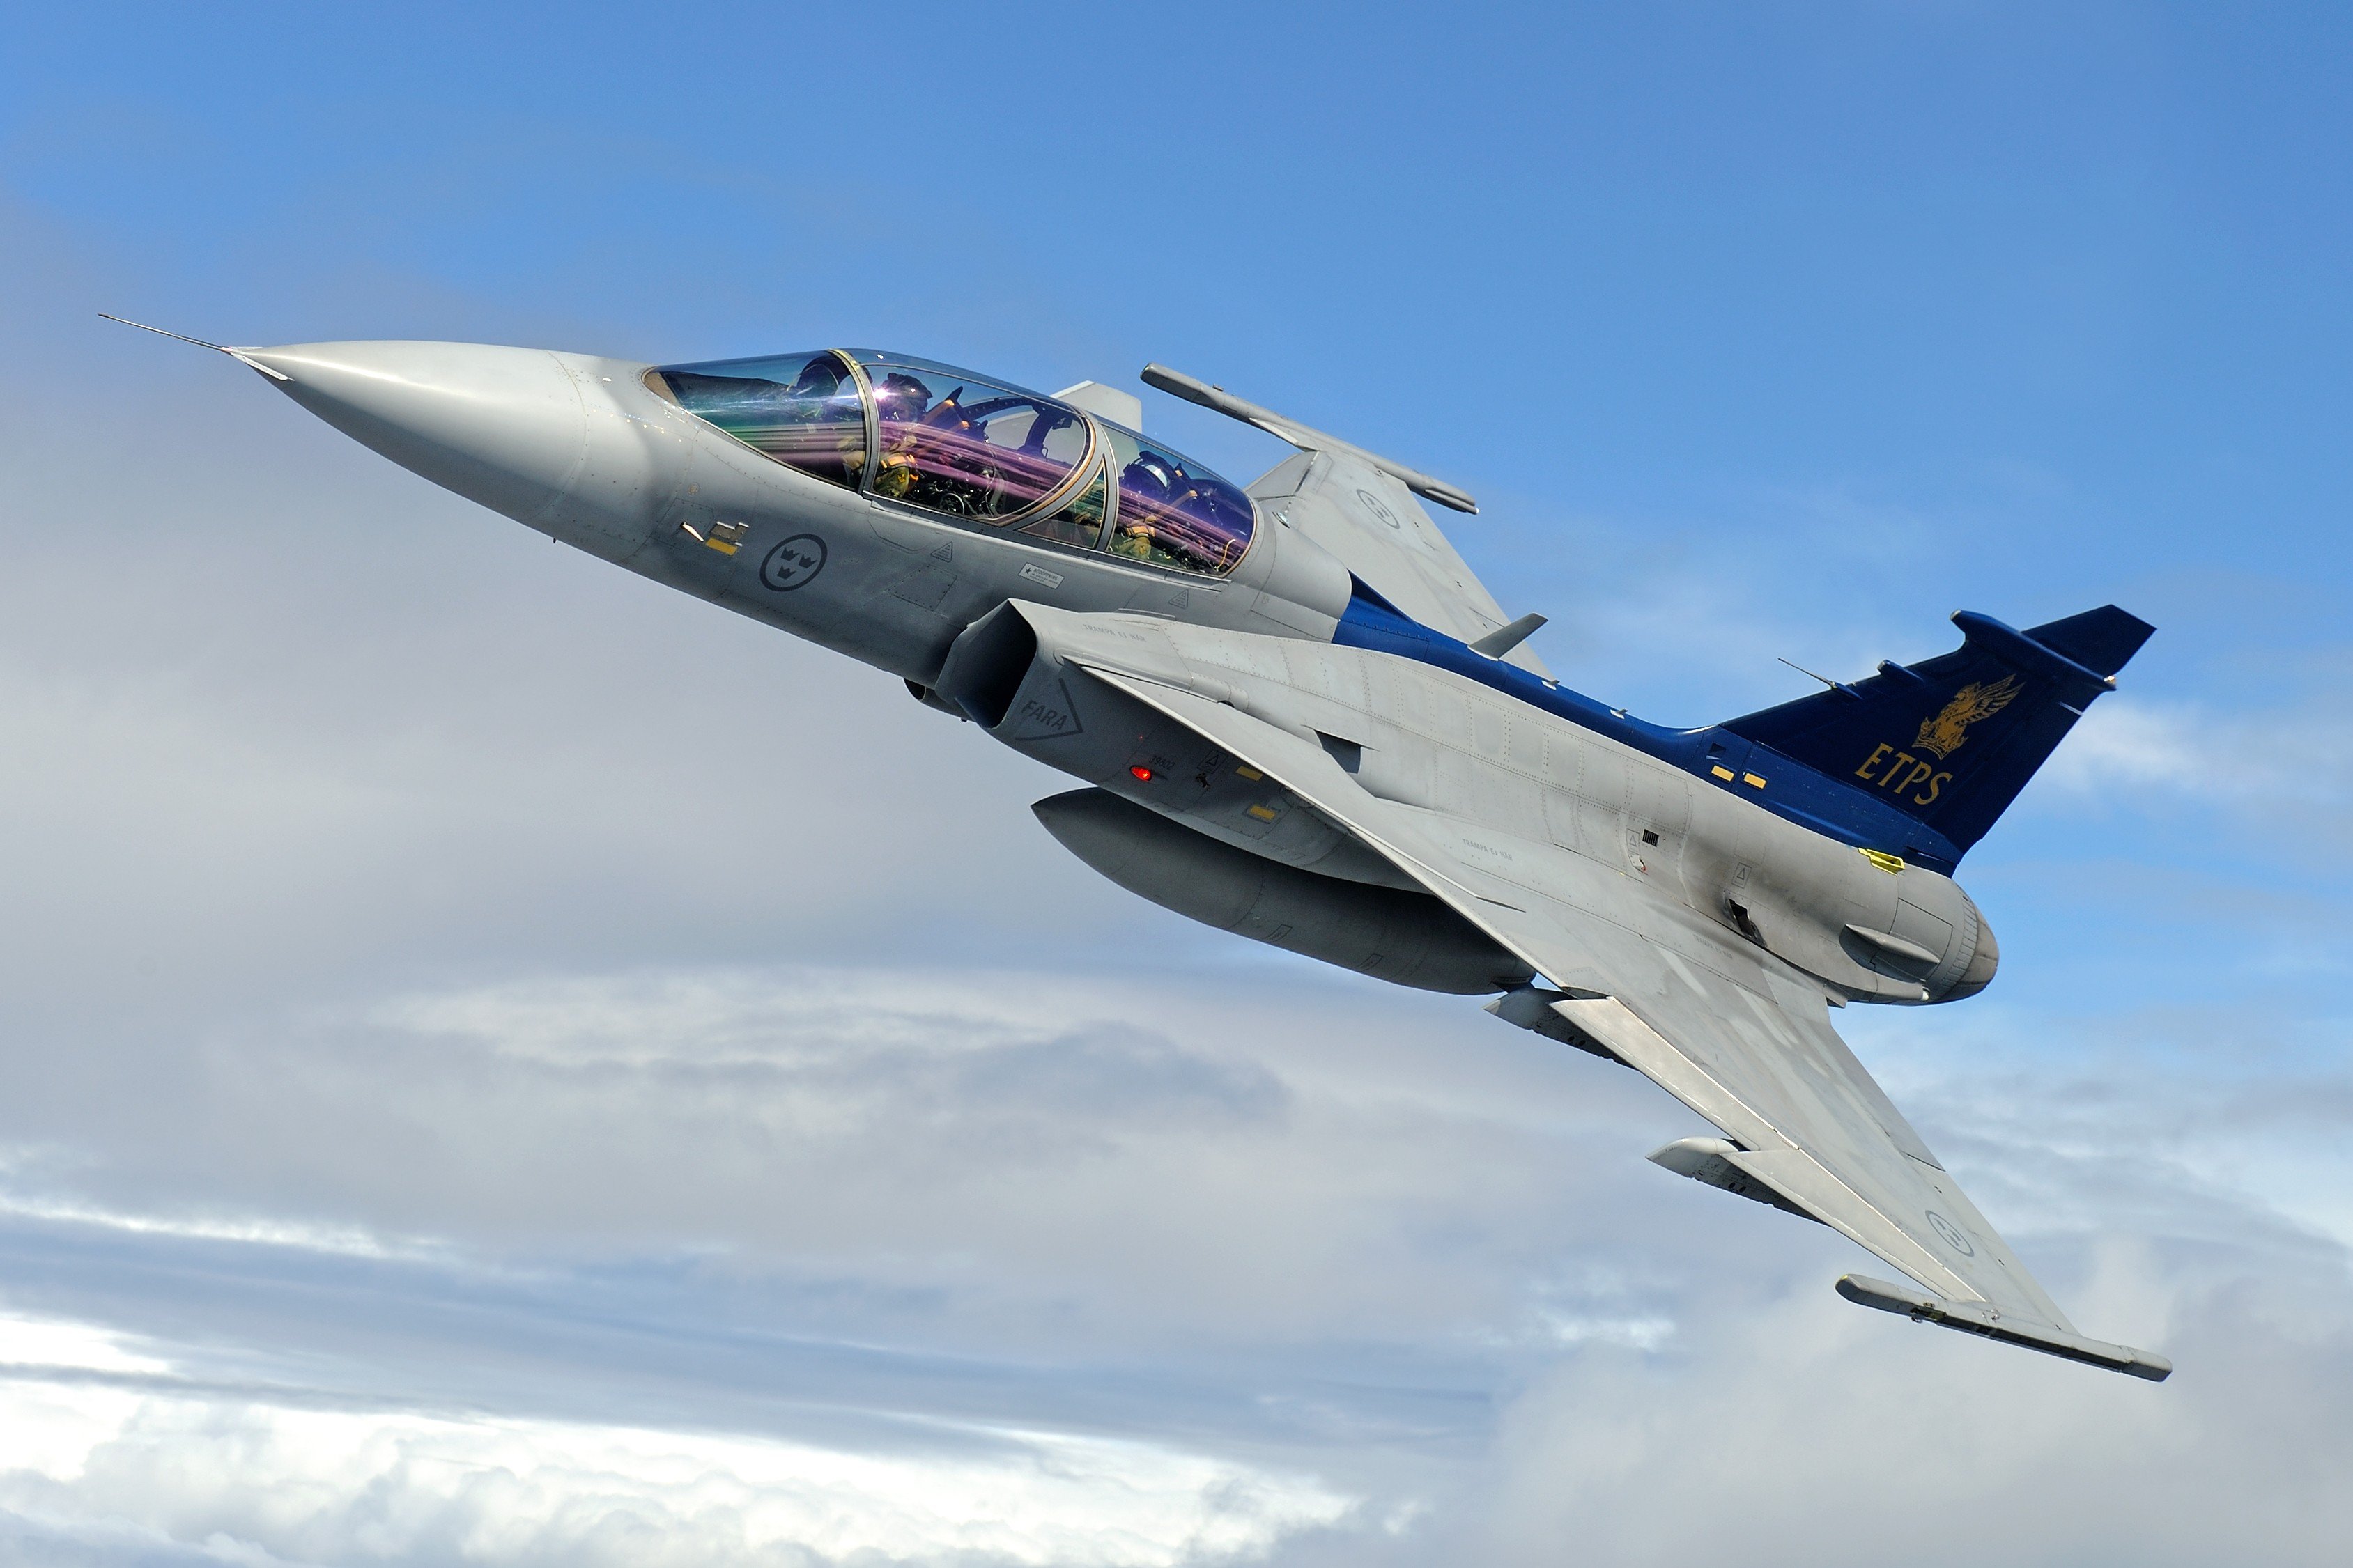 Swedish, Aircraft, Military aircraft, JAS 39 Gripen, Swedish Air Force, Jet fighter, Airplane Wallpaper